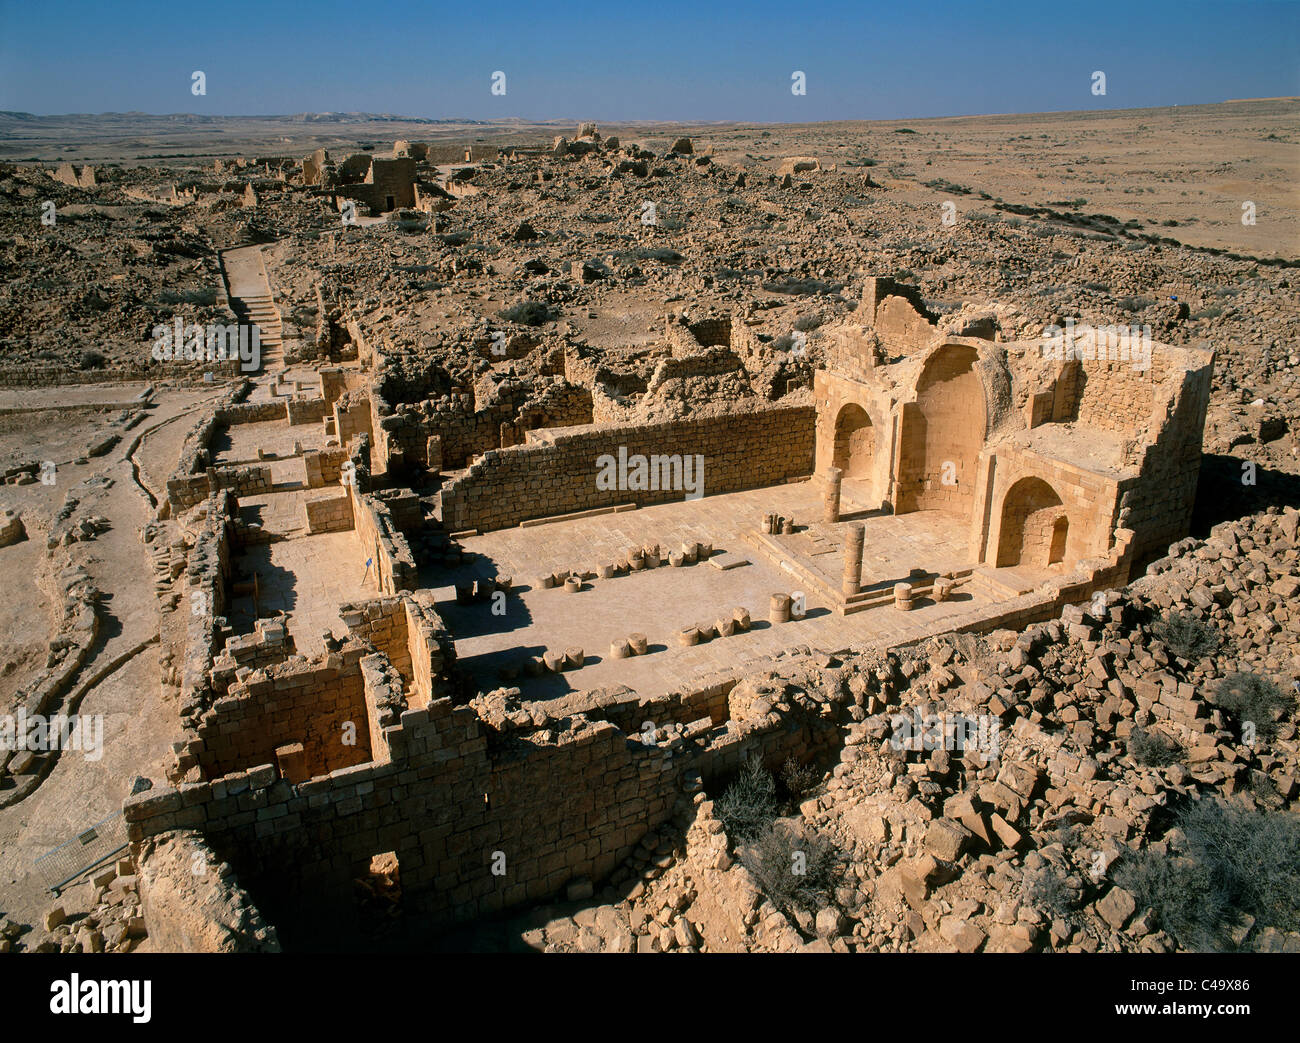 Aerial photograph of the ruins of Shivta in the Negev desert Stock Photo